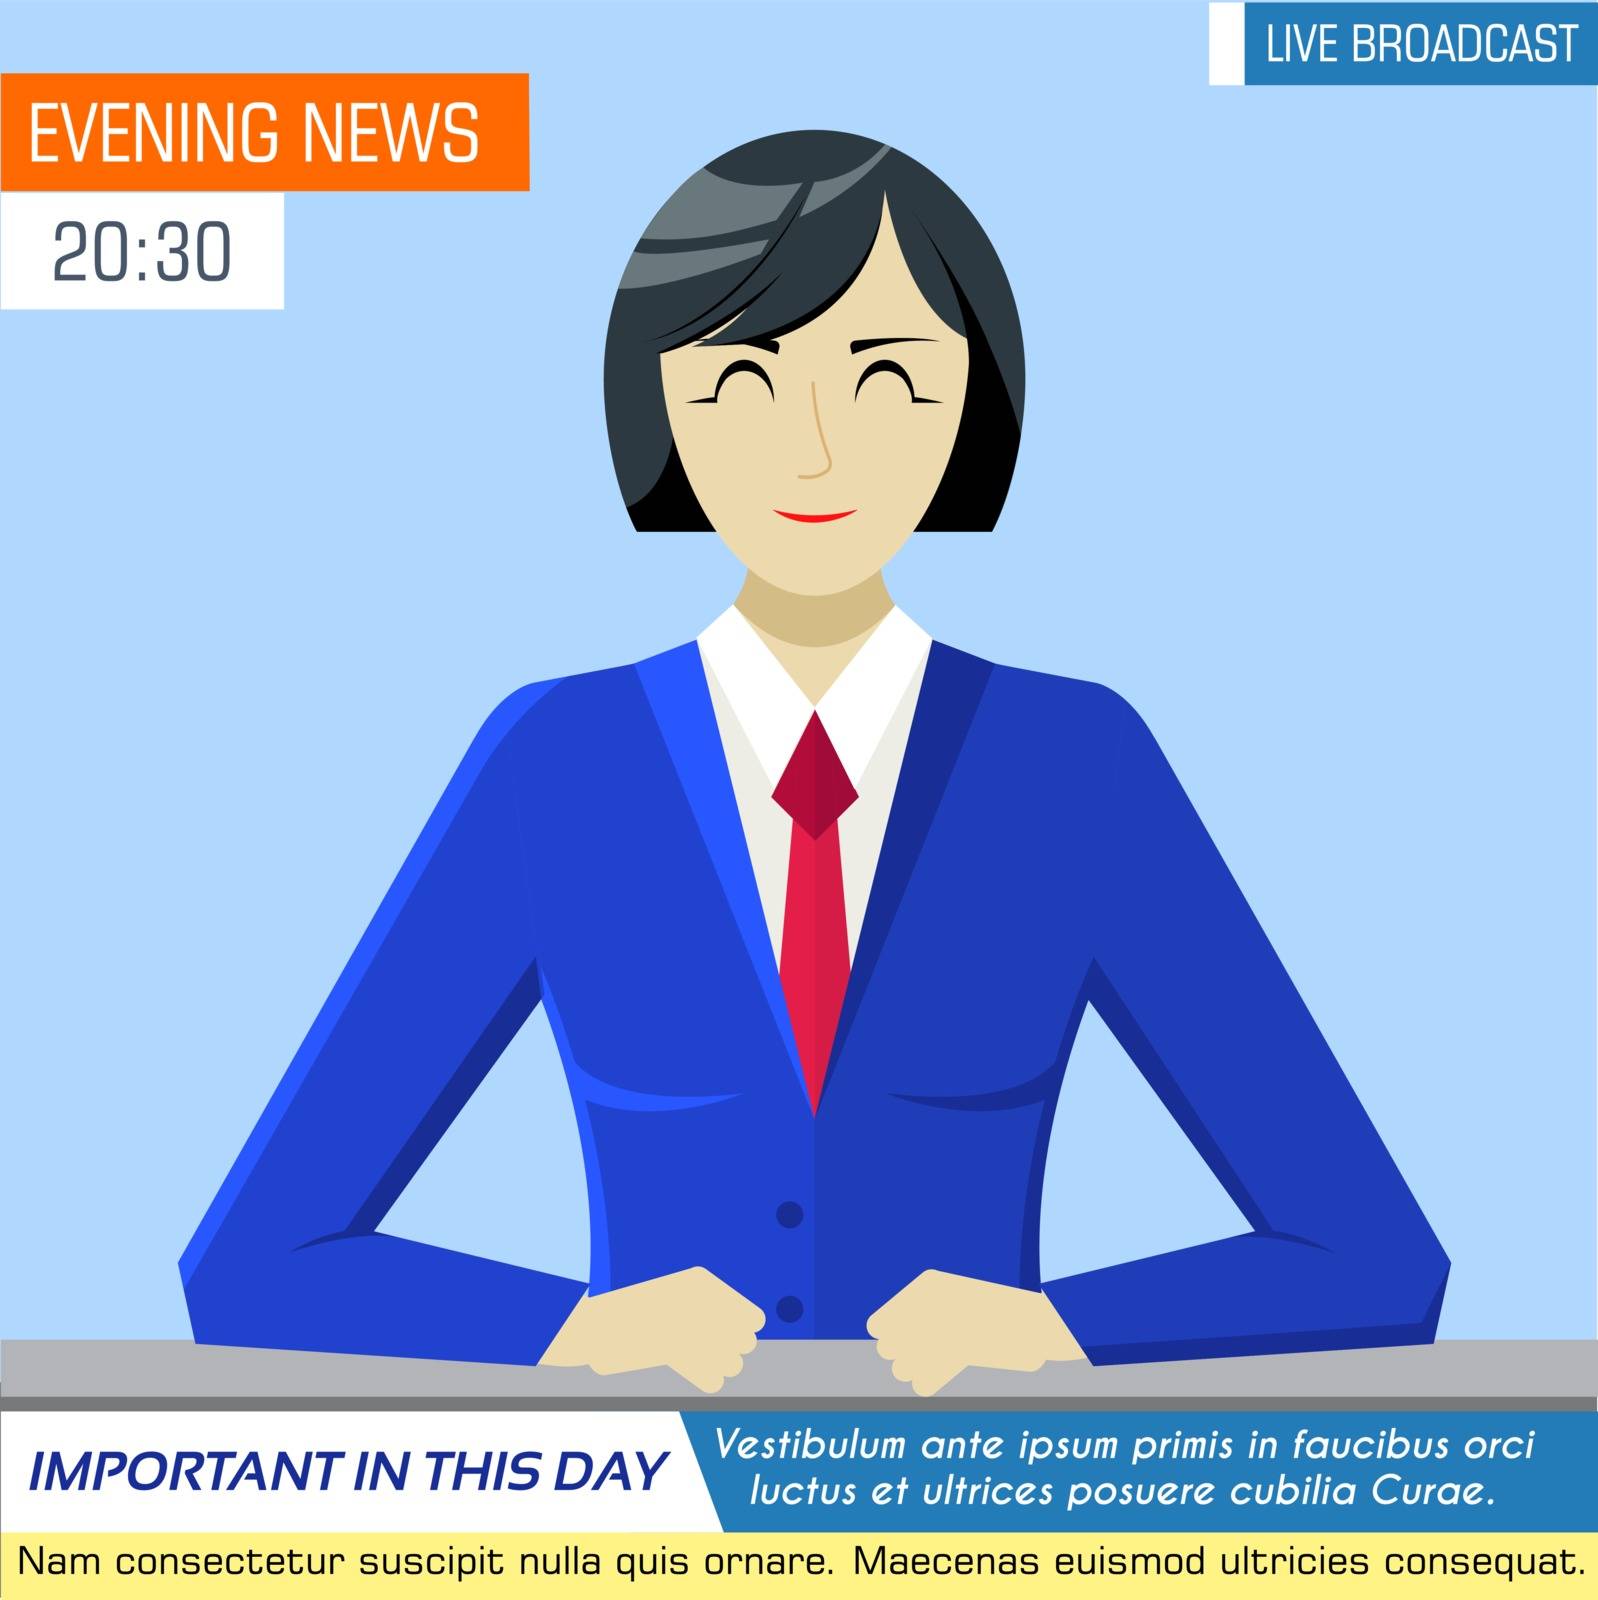 global news information equipment for journalist background. Icons flat style on blue concept. Vector illustration colorful template for you design, web and mobile applications.